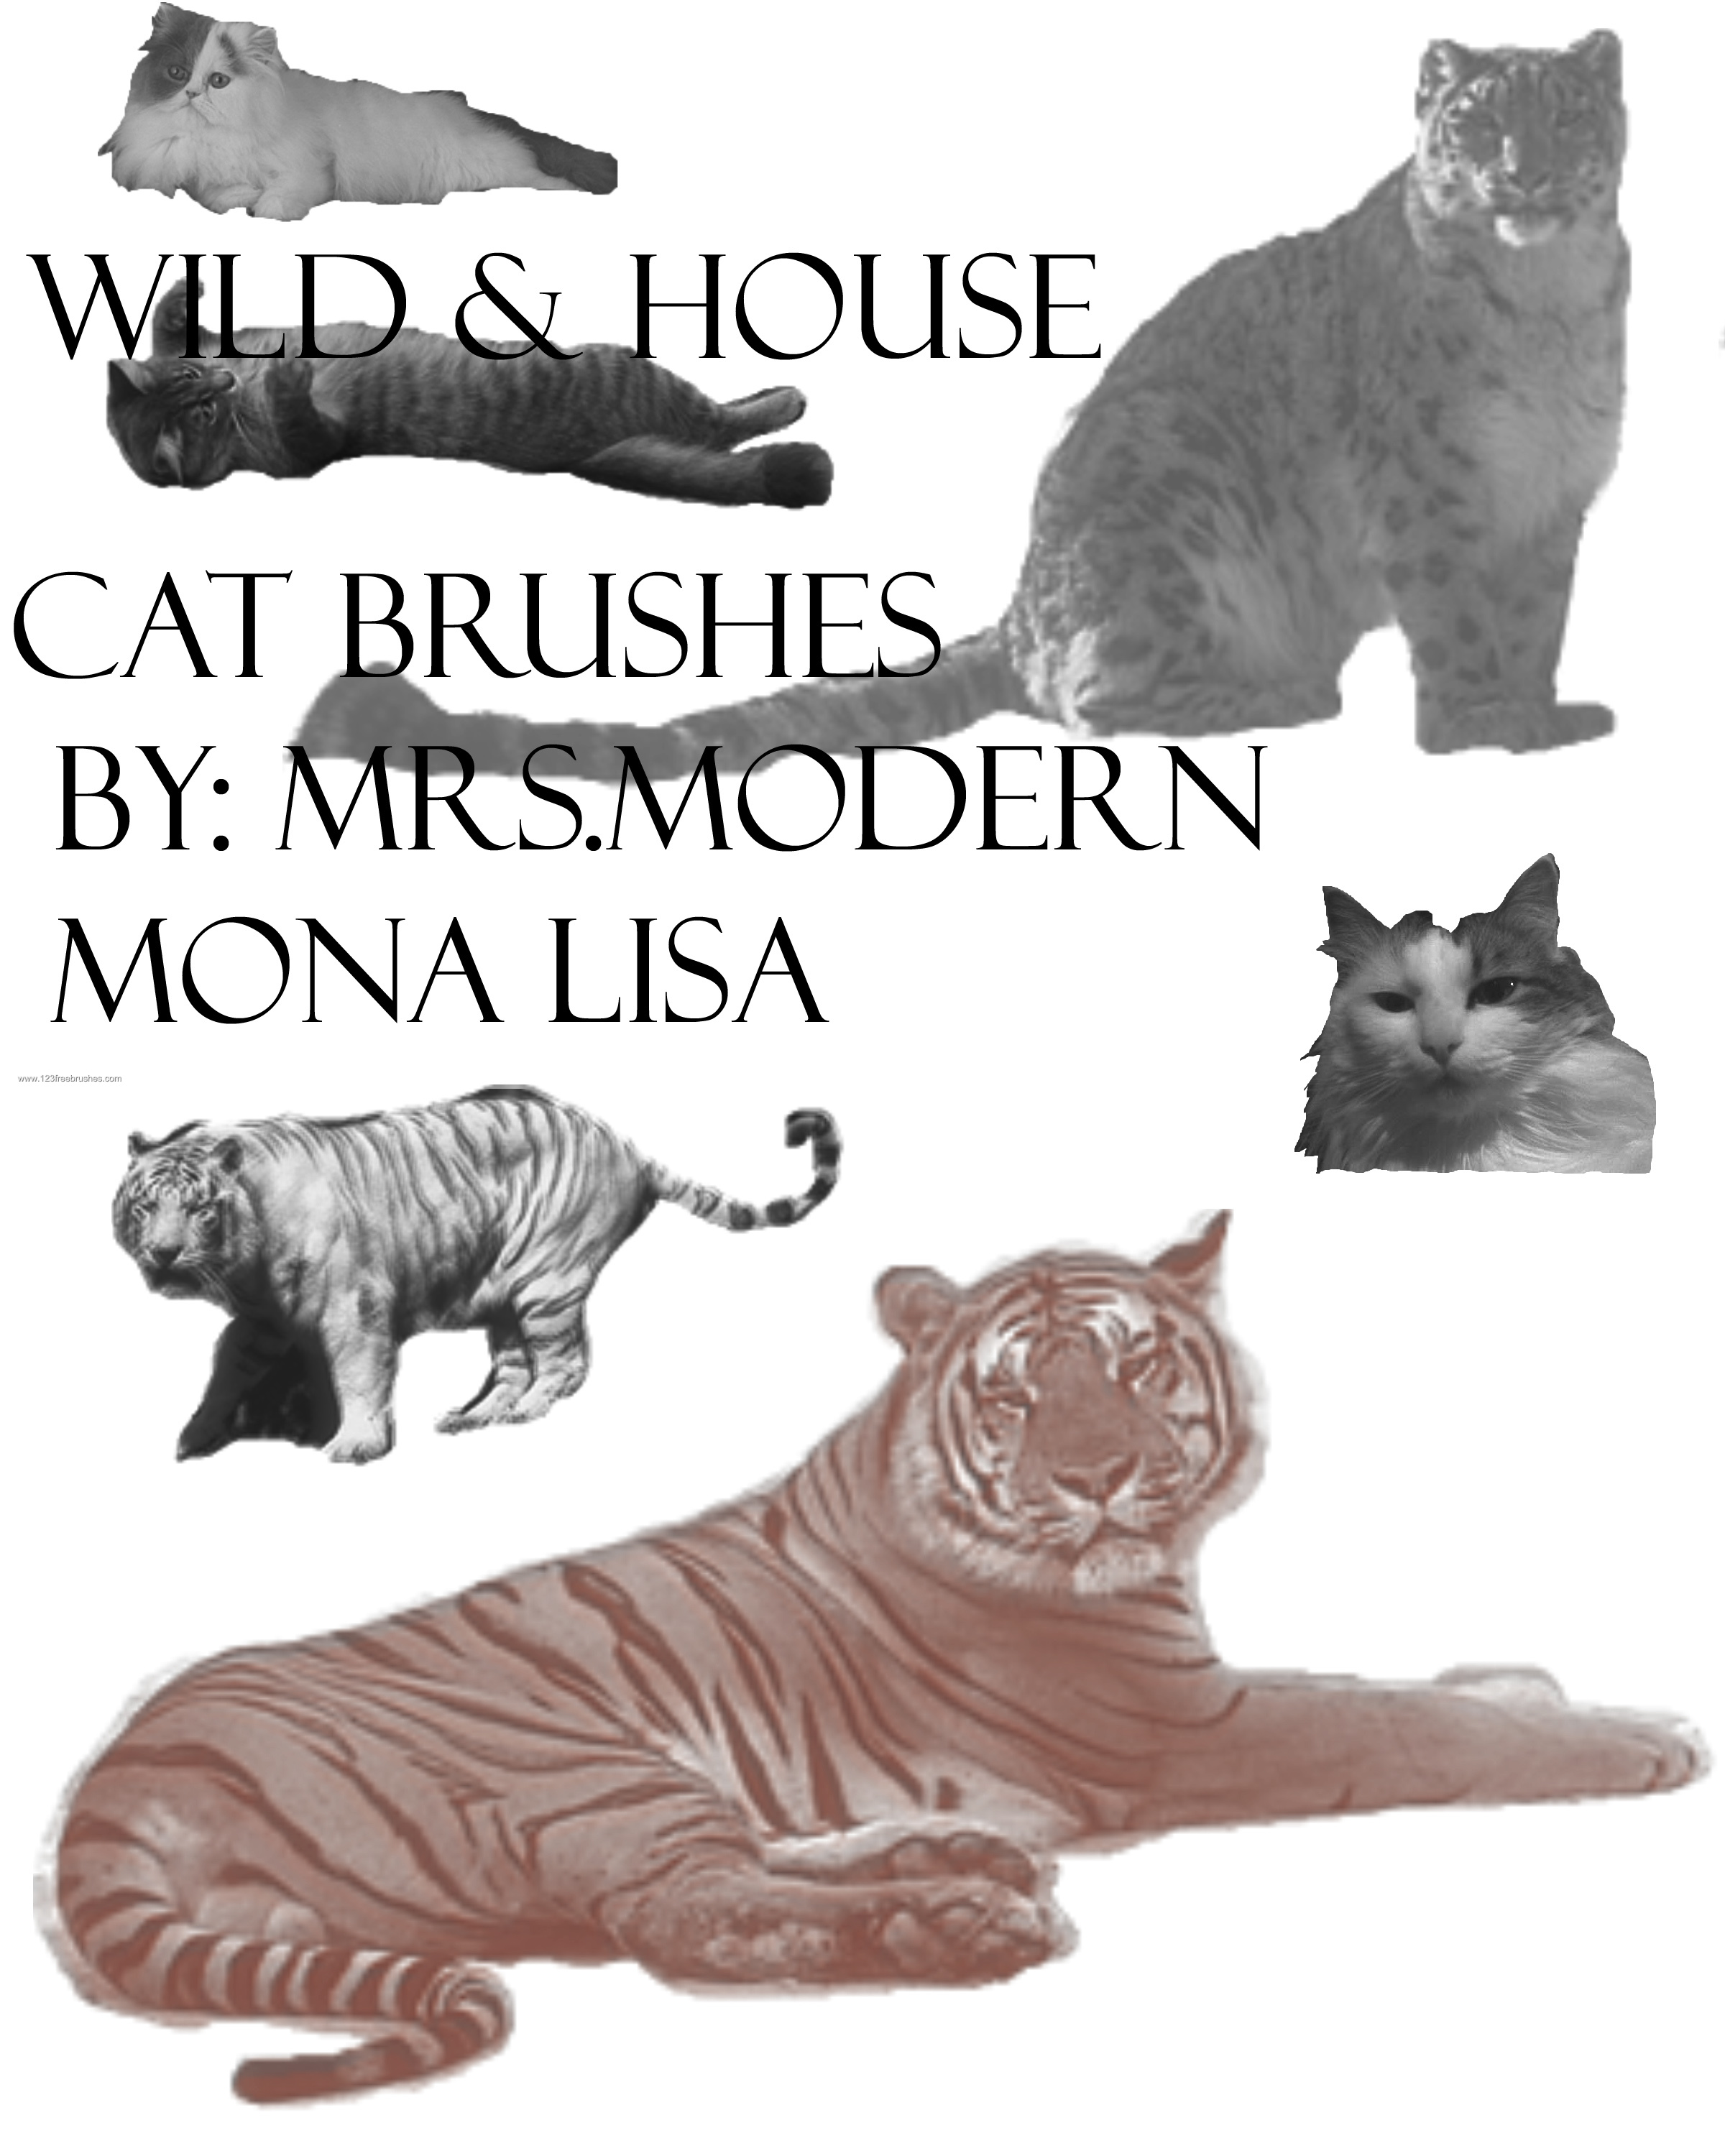 Wild Cats and House Cat